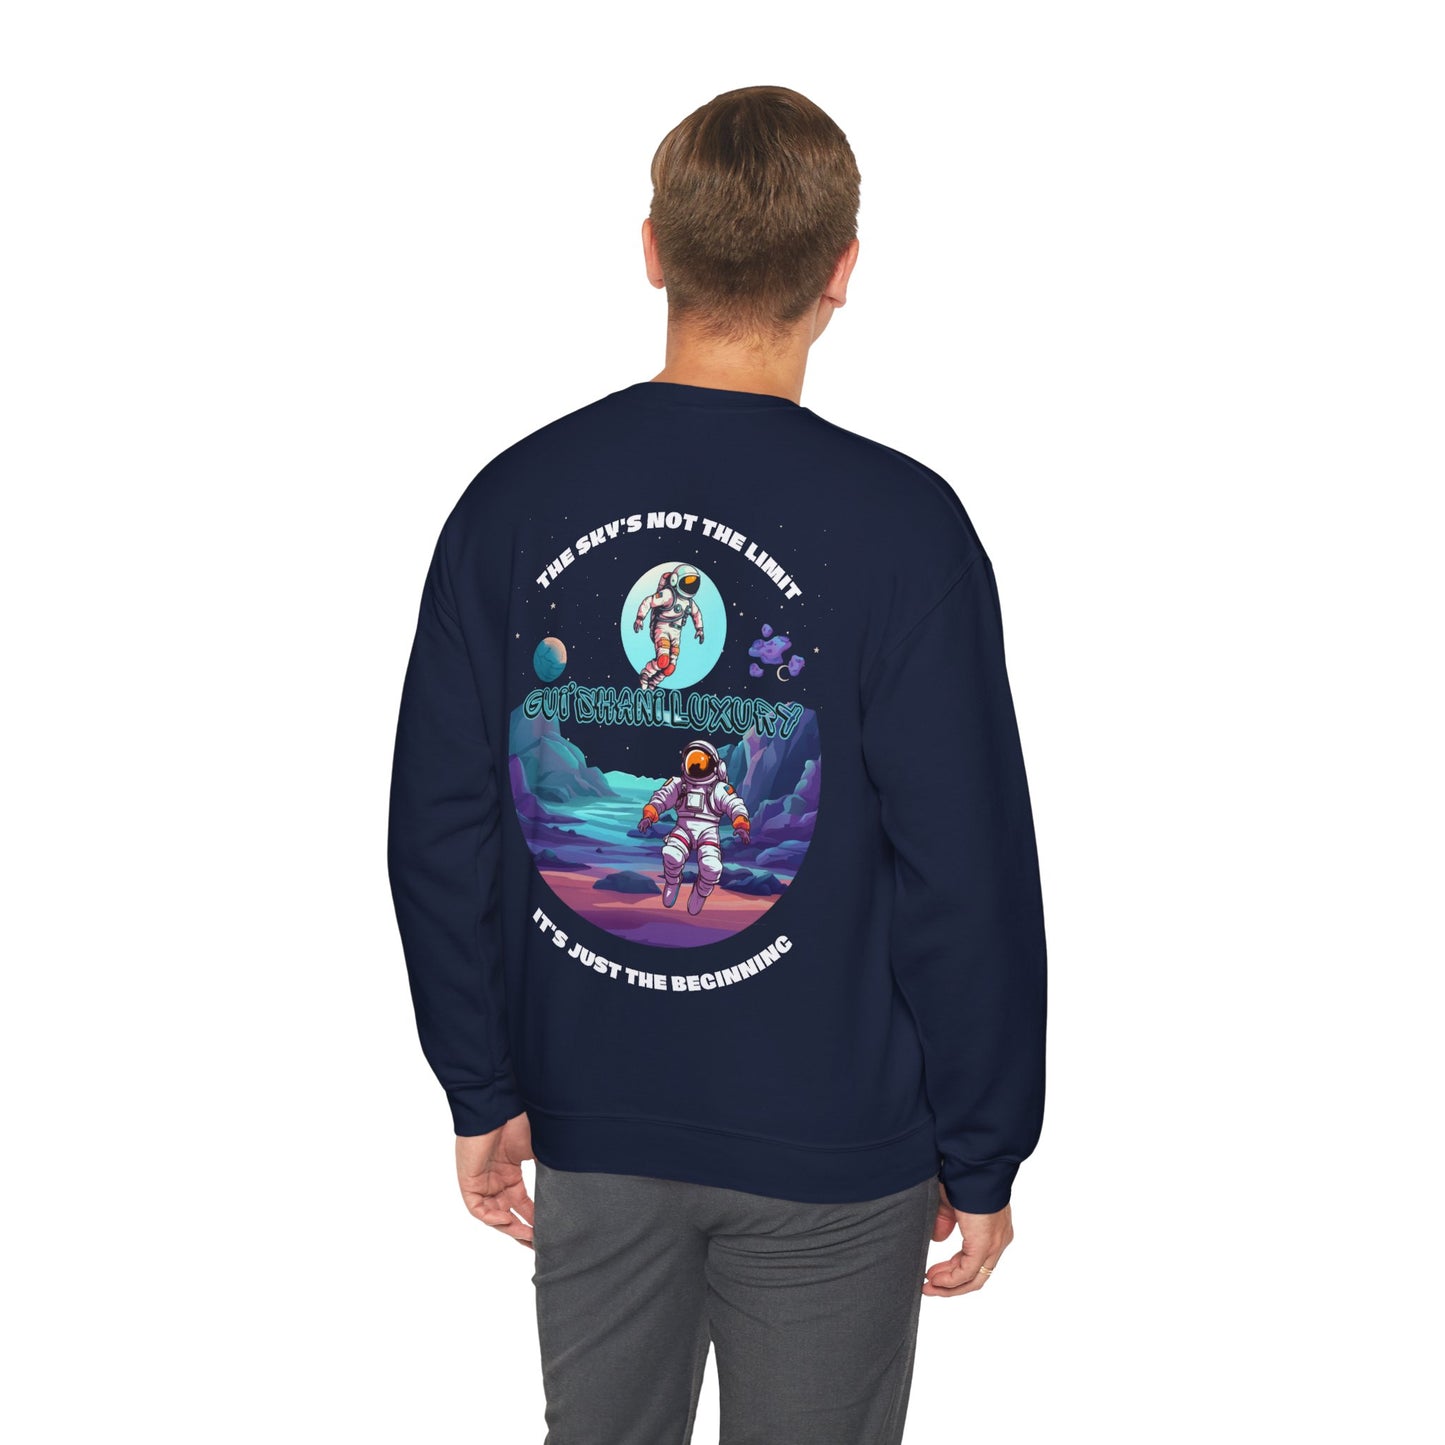 The Sky is just the Beginning Crewneck